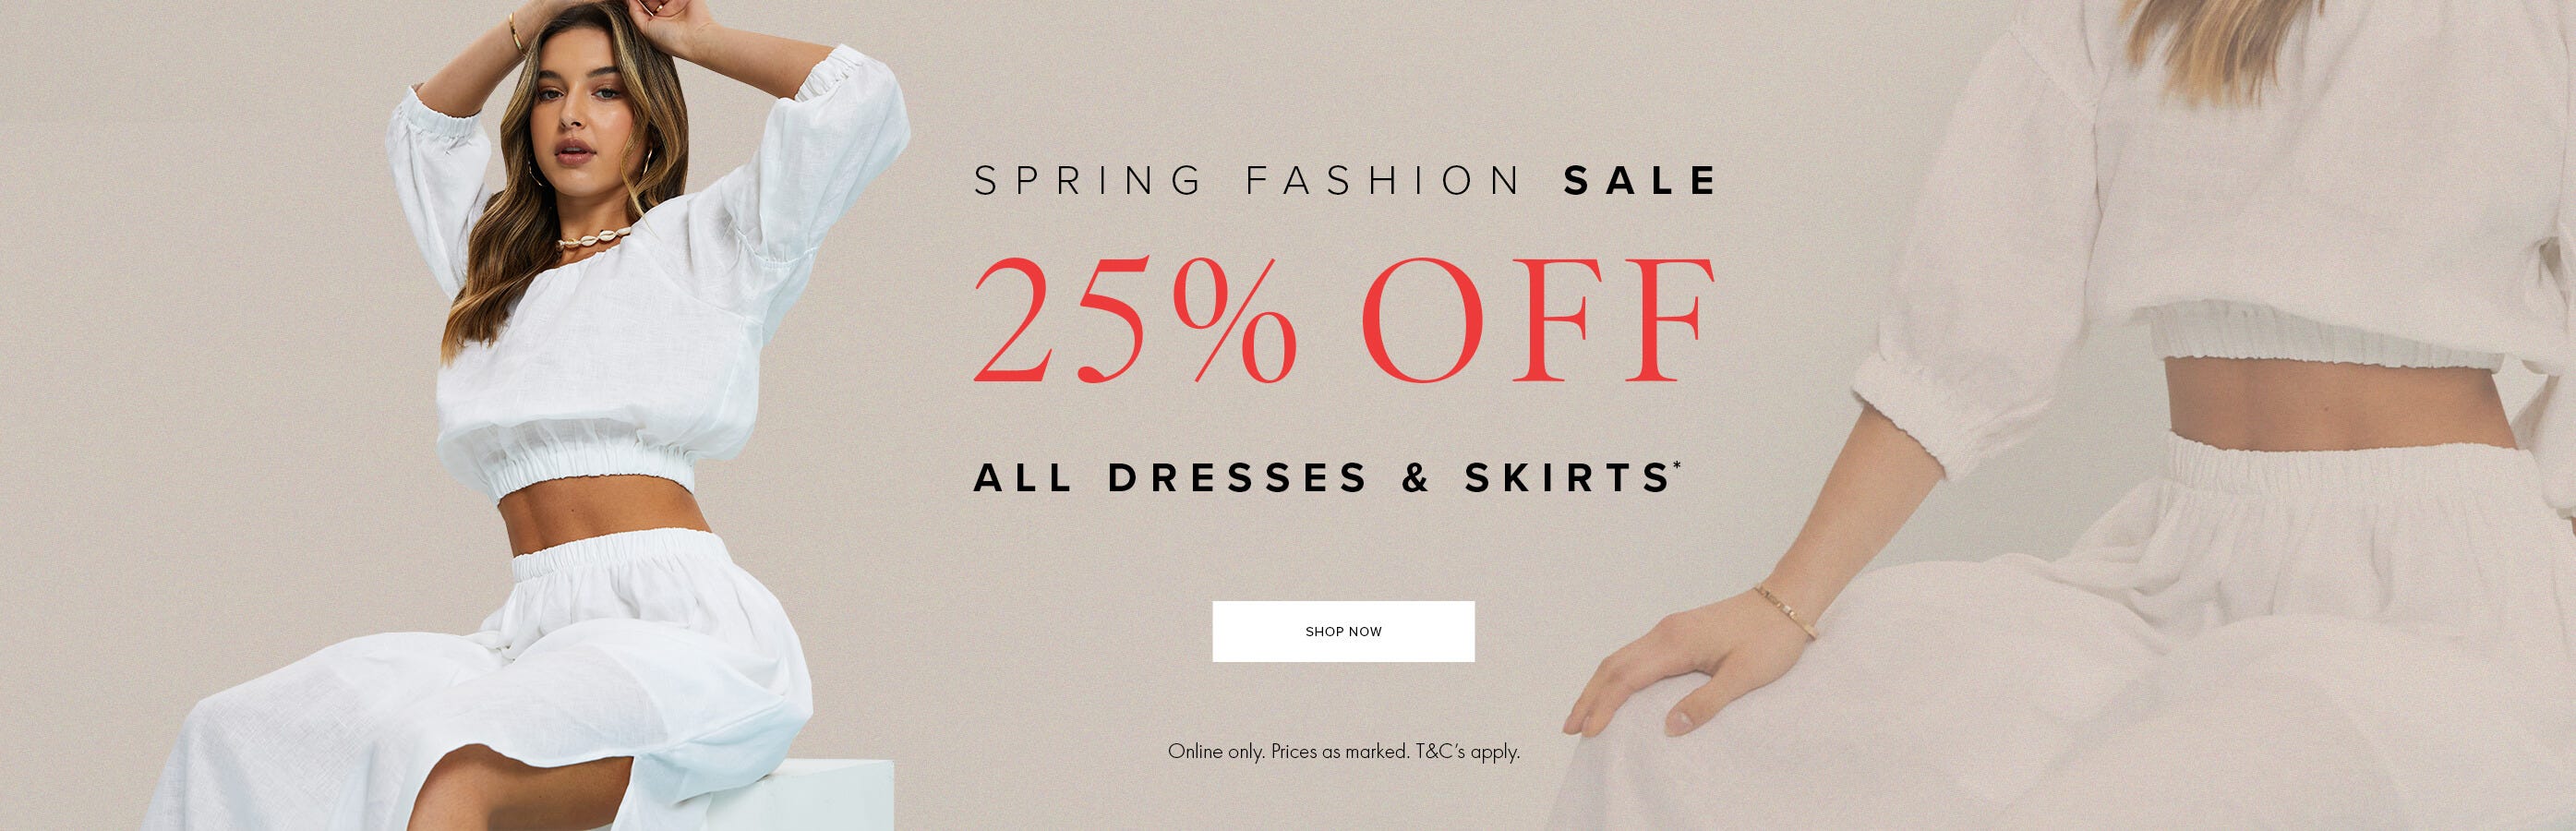 25% OFF on all dresses & skirts